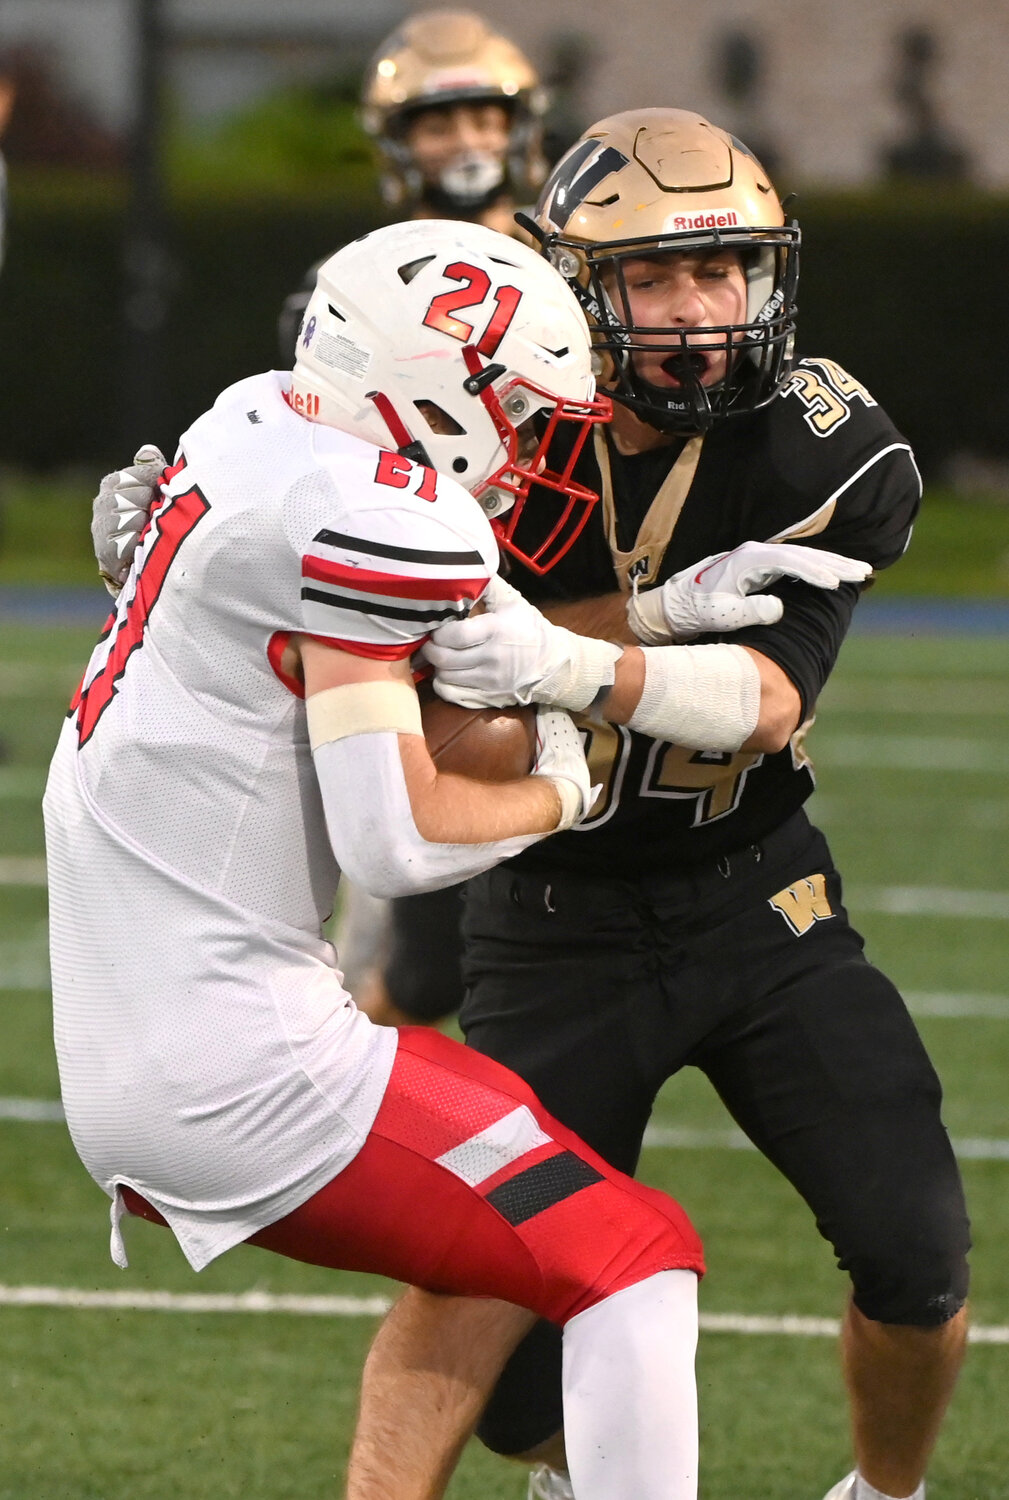 Wantagh’s John Gendels, right, had a grip on Floral Park’s Chase McLoughlin during last Friday’s Conference III semifinal matchup.